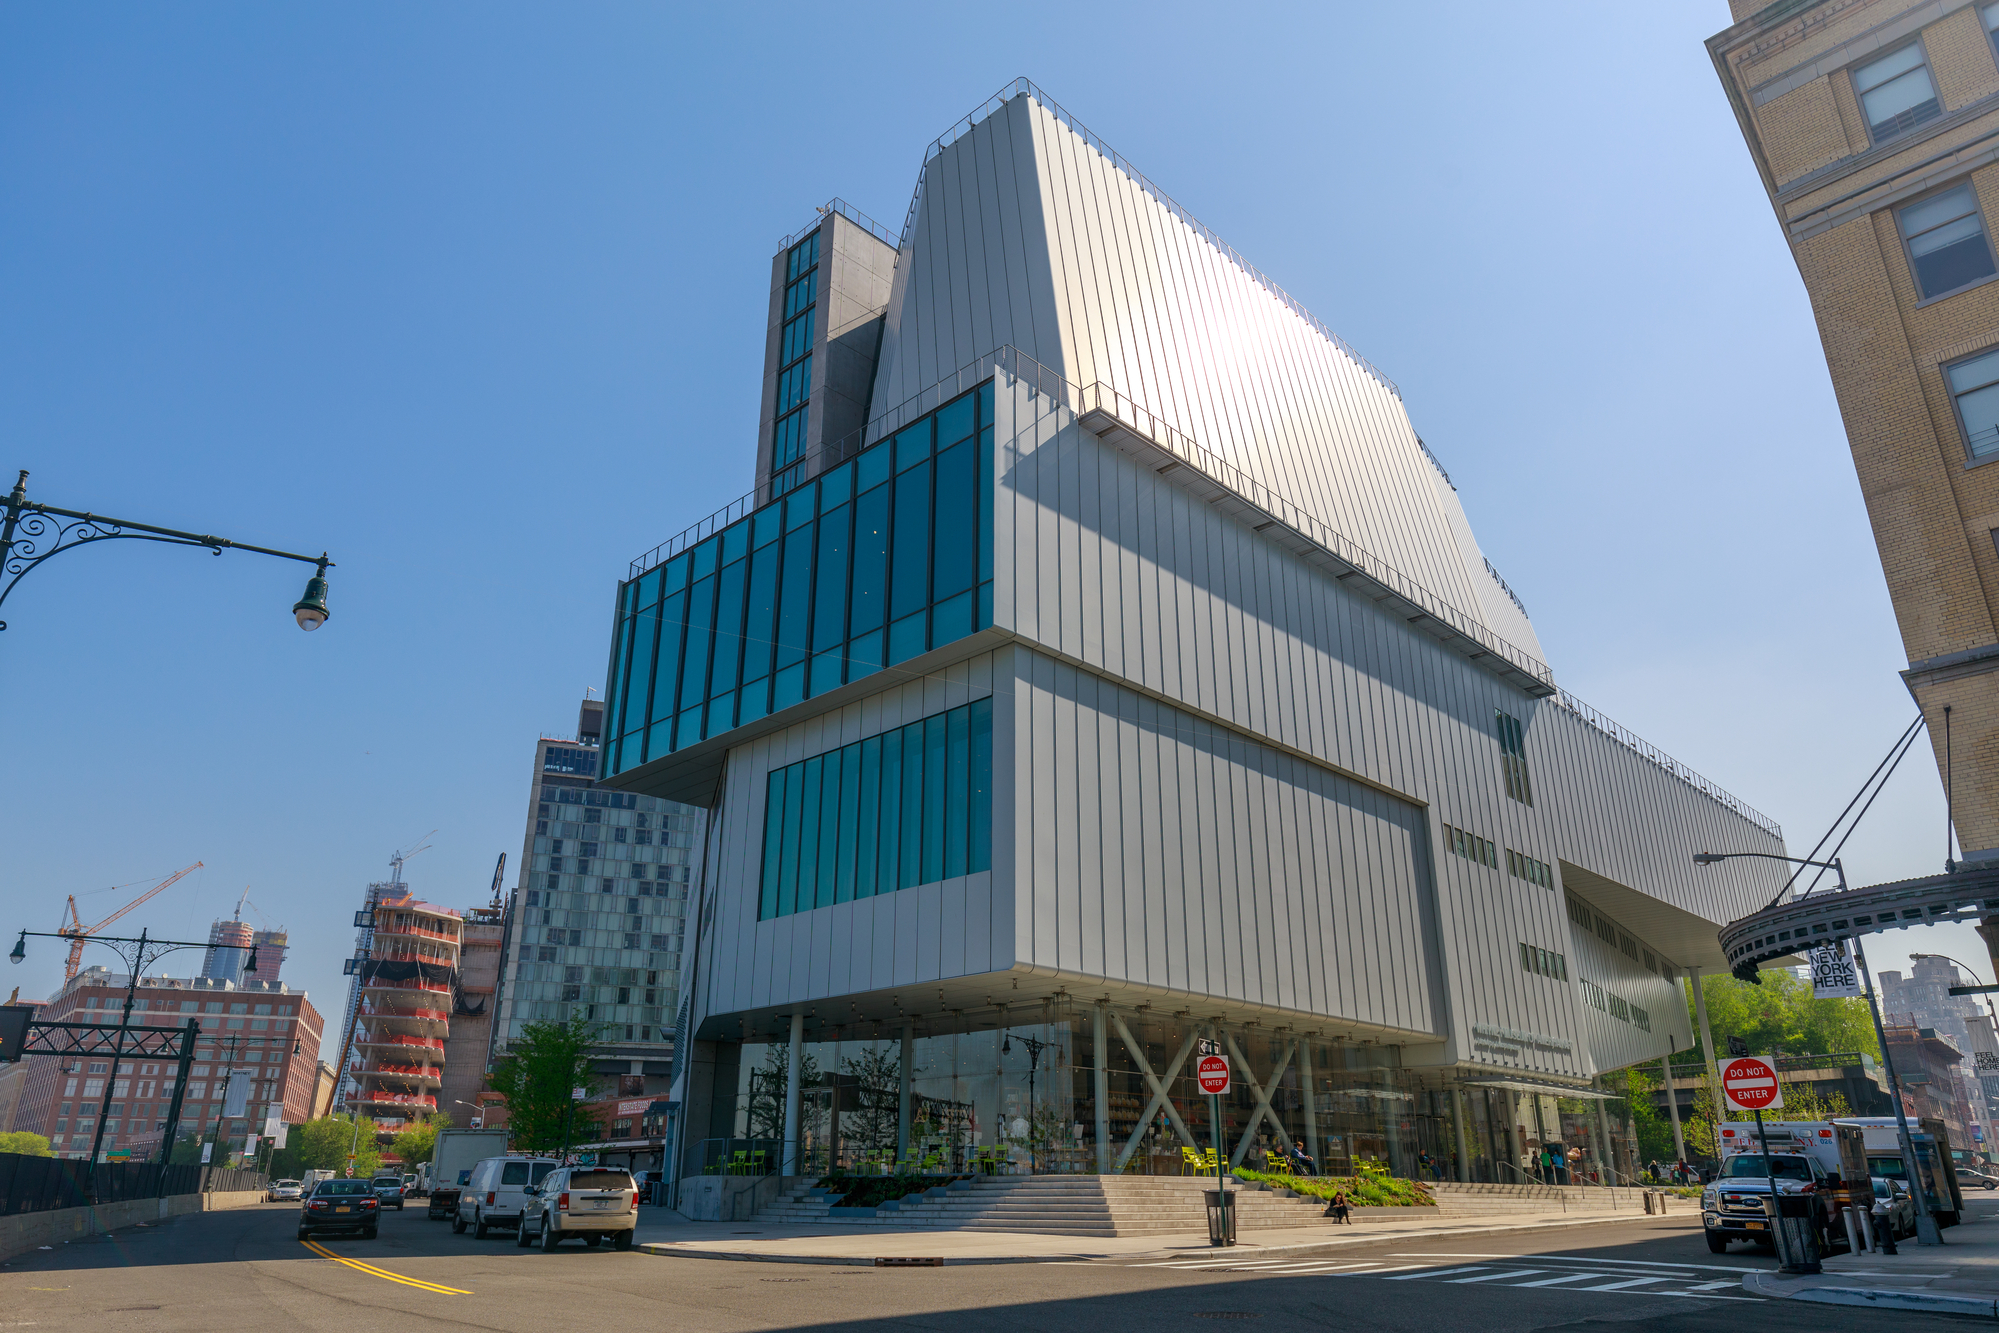 The Whitney museum of American art in New York City